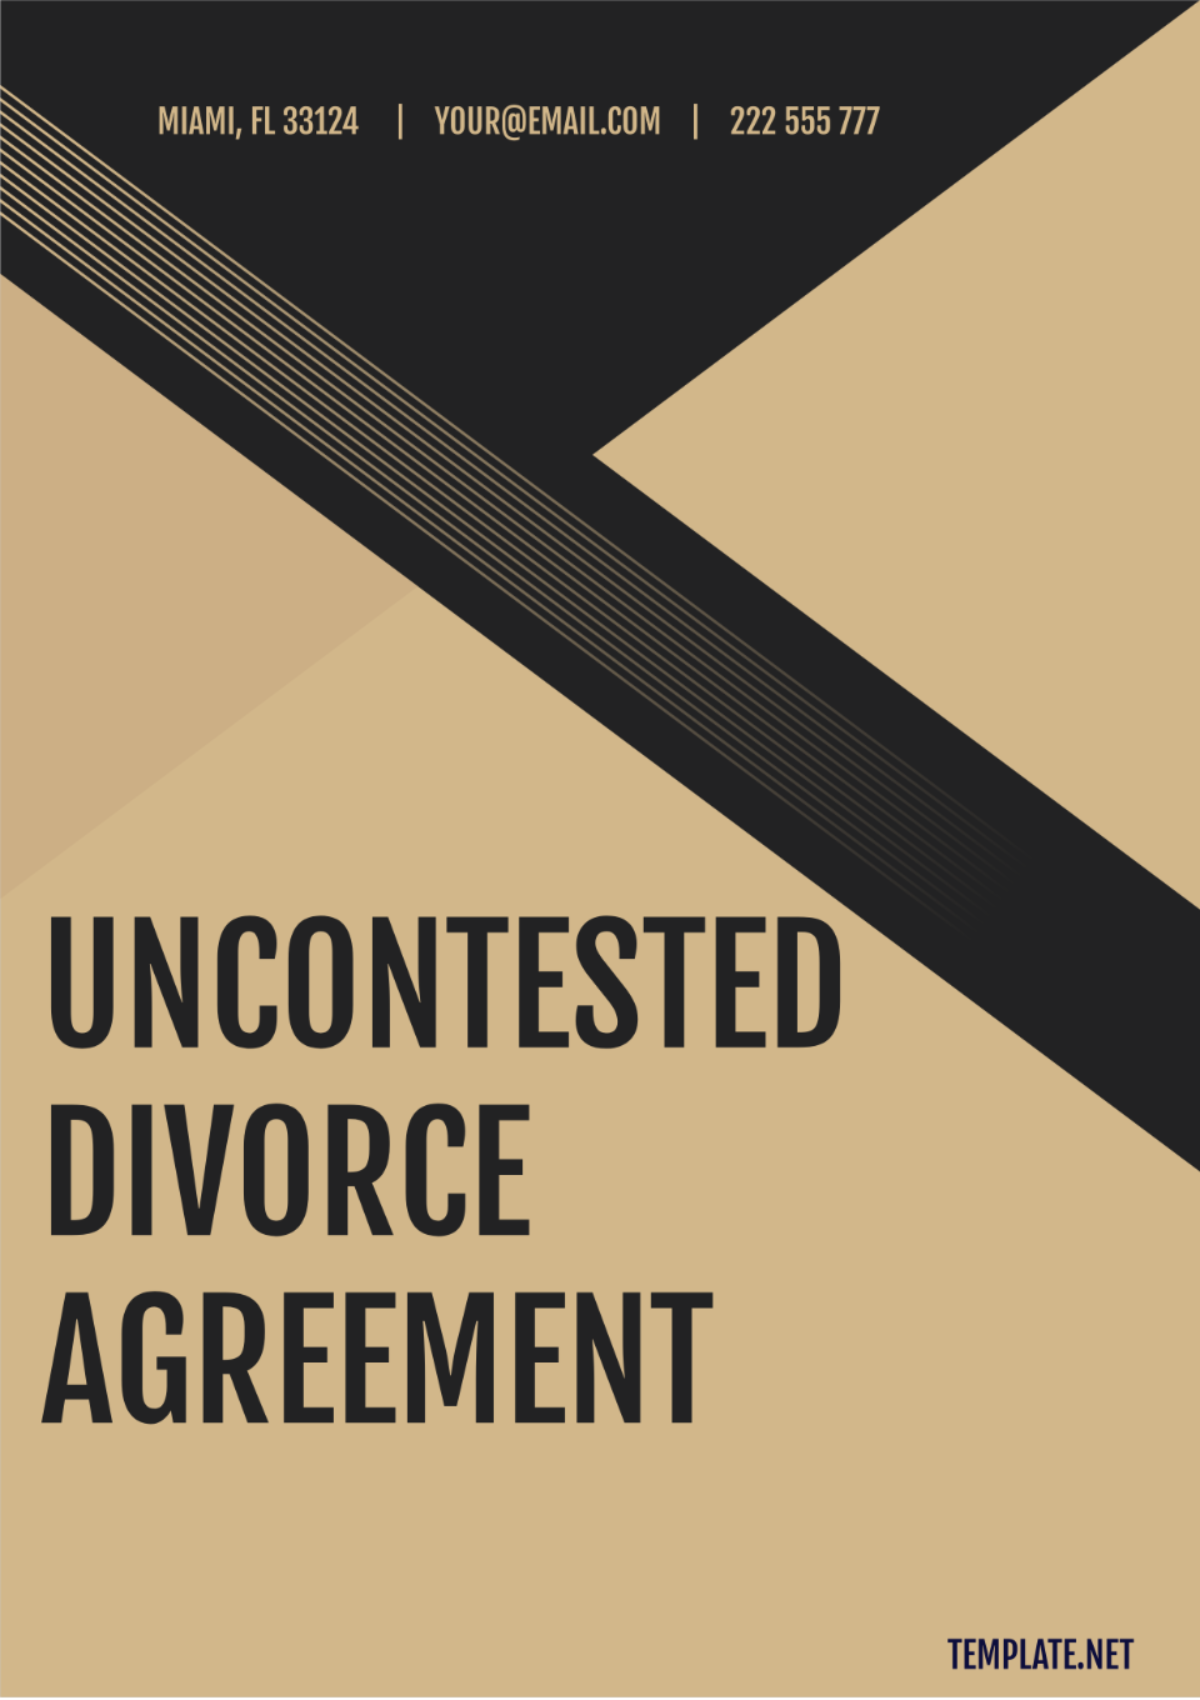 Uncontested Divorce Agreement Template